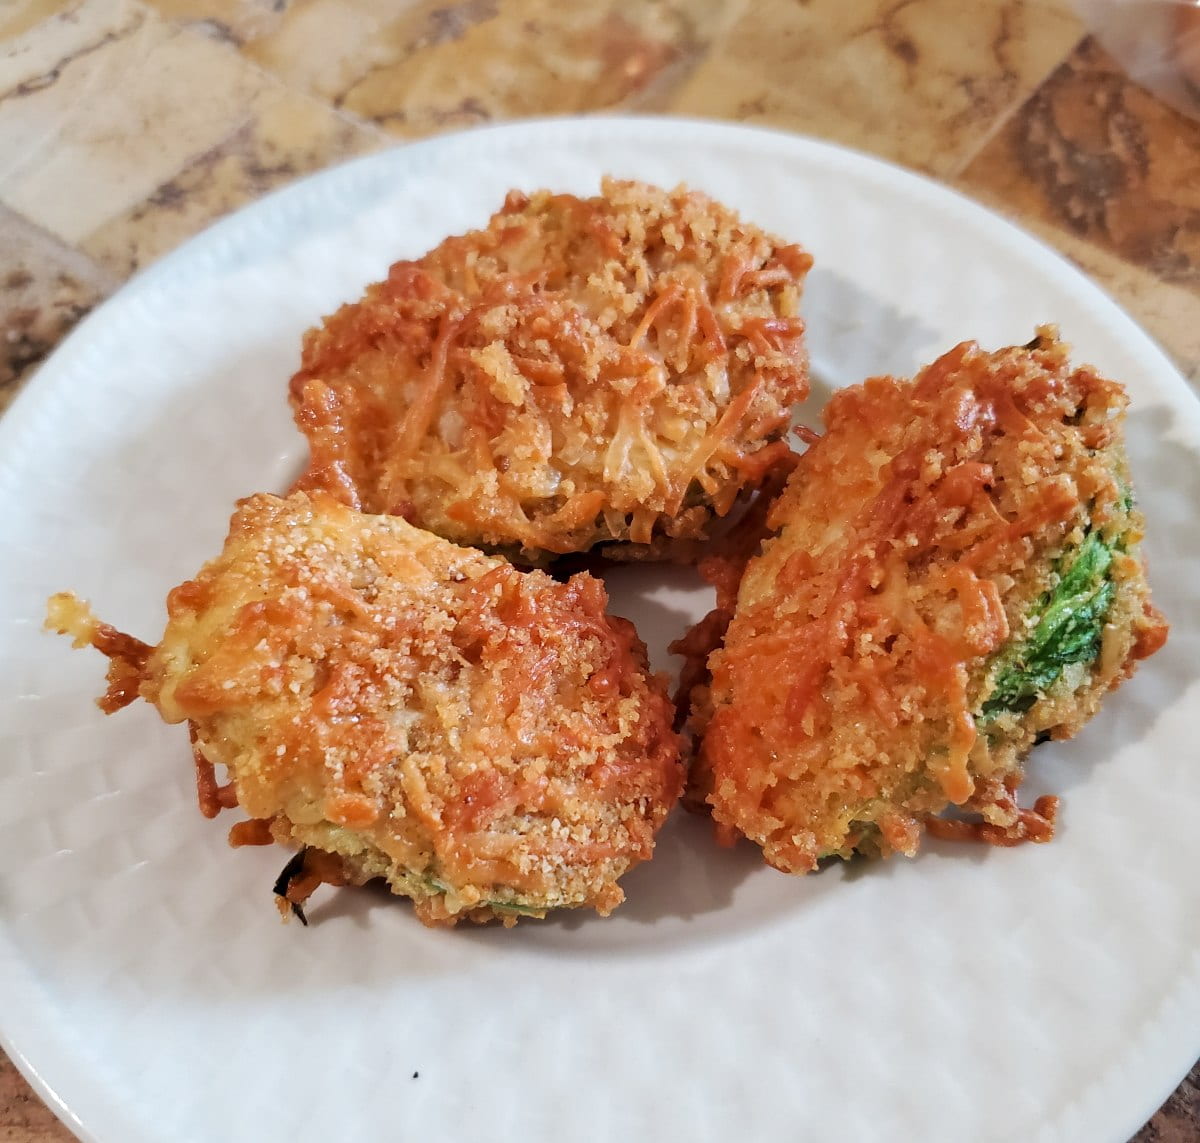 Gluten free parmesan crusted brussels sprouts recipe from cleveland cooking